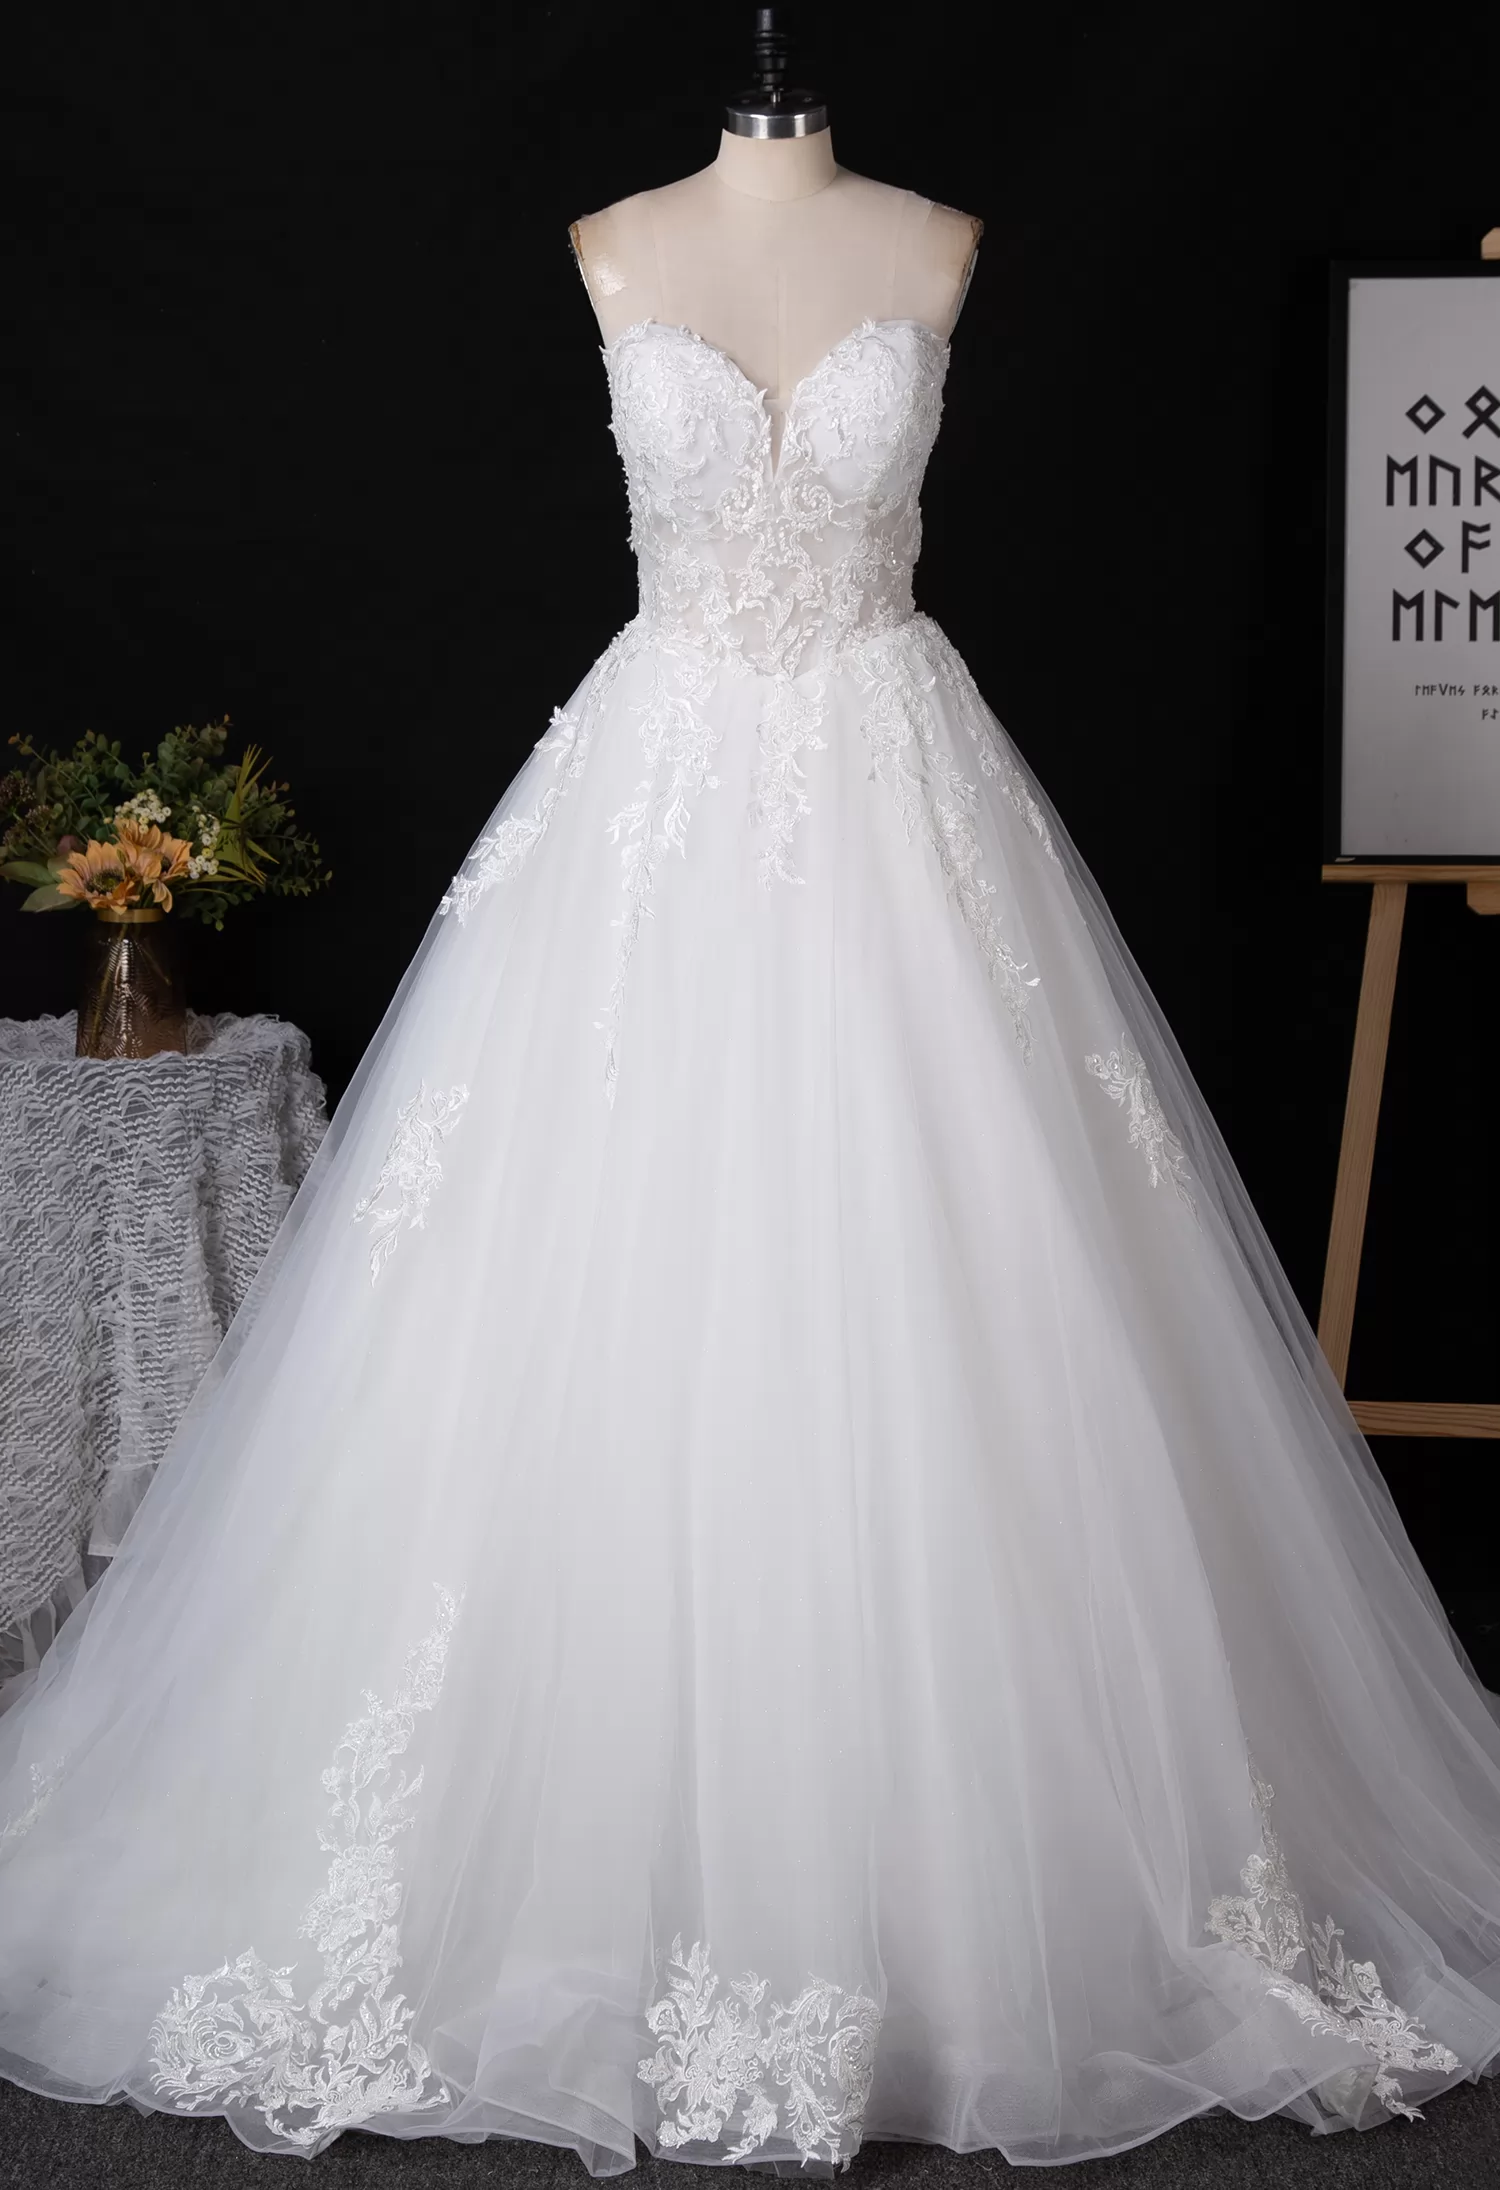 Strapless Sweetheart Wedding Dress With Illusion Back